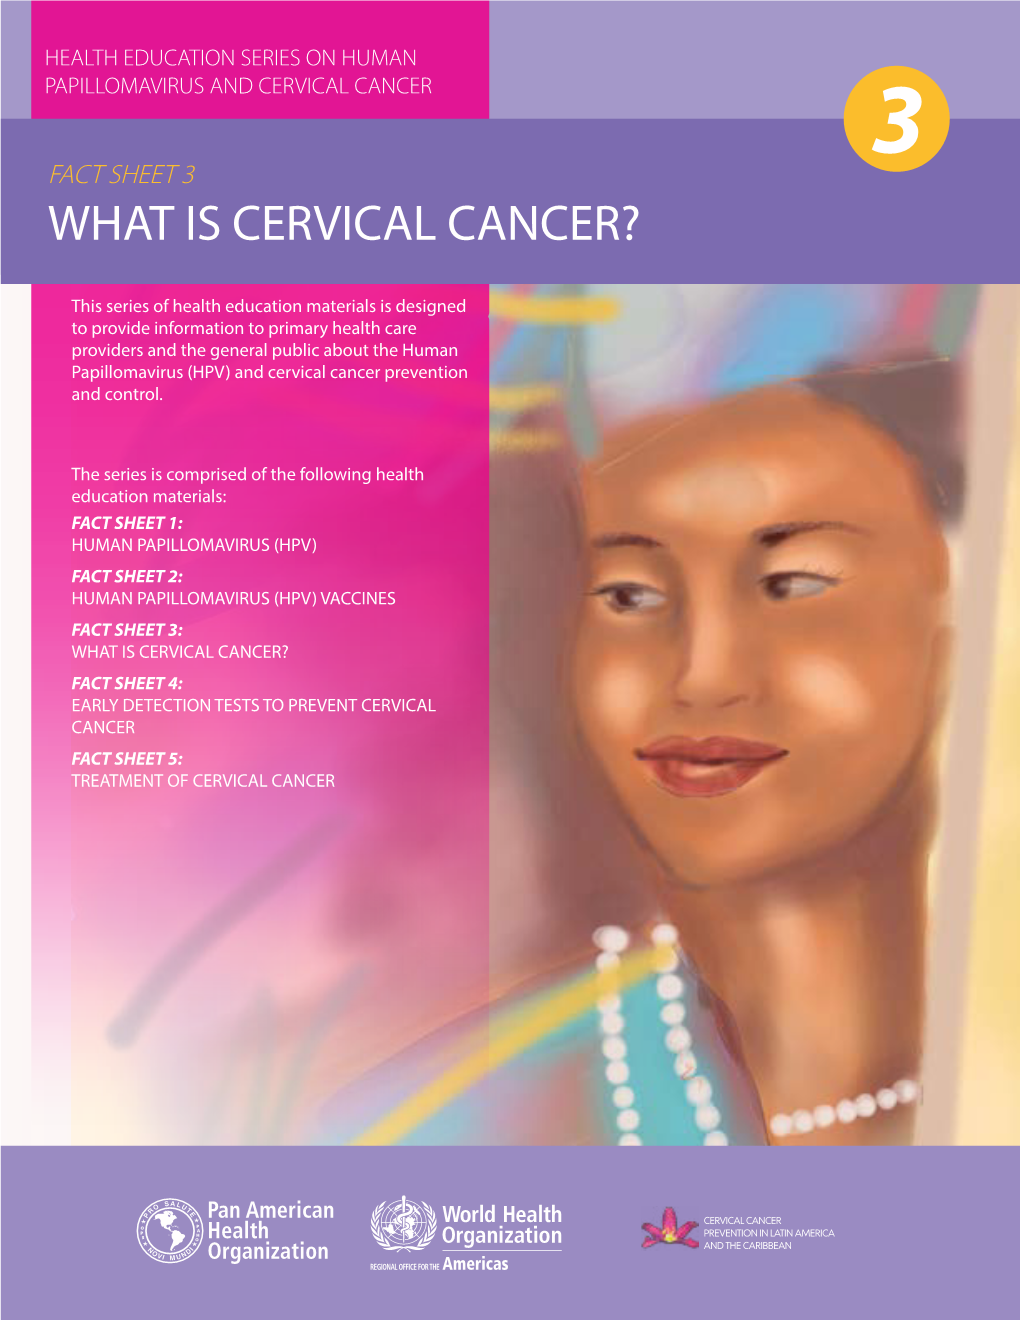 What Is Cervical Cancer?